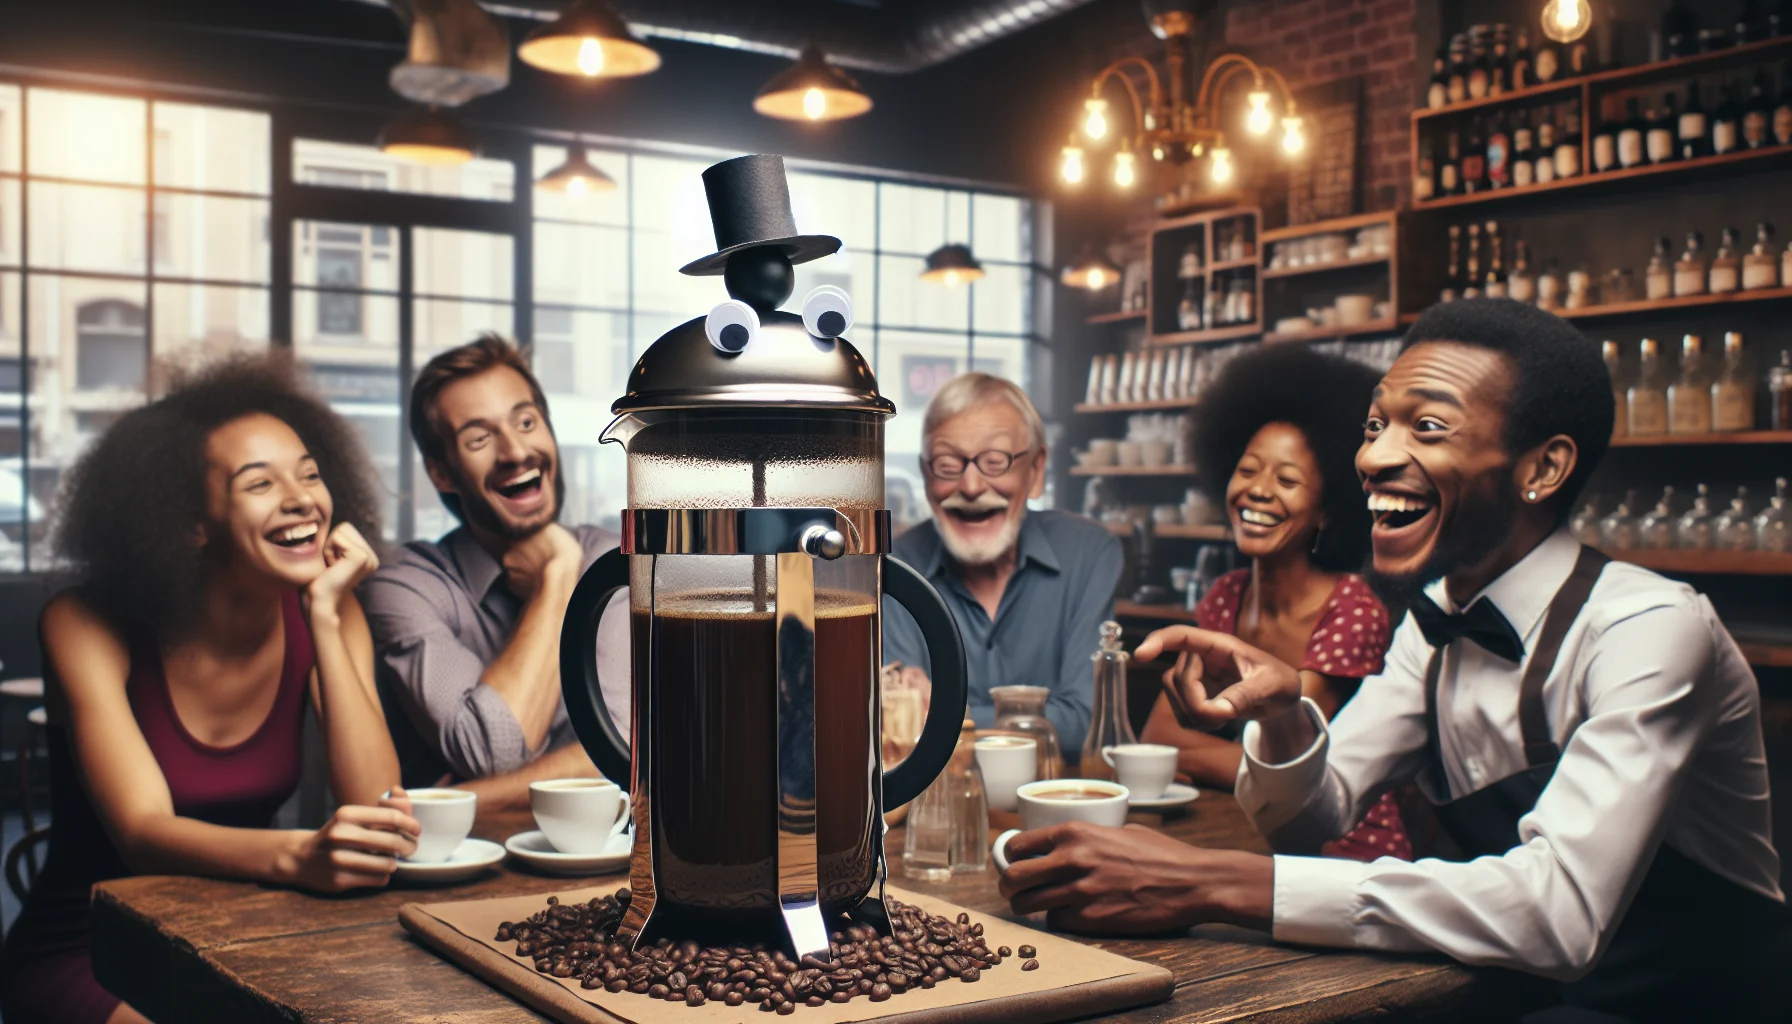 Generate a humorous and realistic image of a French Press. Set the scene within a coffee shop. The French press could be 'dressed up' in a comedic manner, perhaps sporting some small googly eyes, a big paper bow tie, and balancing a tiny top hat at its handle, capturing the attention of a room full of casting off waves of delicious coffee aroma. A group of diverse individuals, including, a young Caucasian female barista watching the sight with amazement, a middle-aged Black male customer chuckling at the sight, and a South Asian elderly man, are all delighted by the amusing sight. The warm, inviting atmosphere of the coffee shop is filled with laughter and joy, spreading the message of the enjoyment that comes with using a French Press.